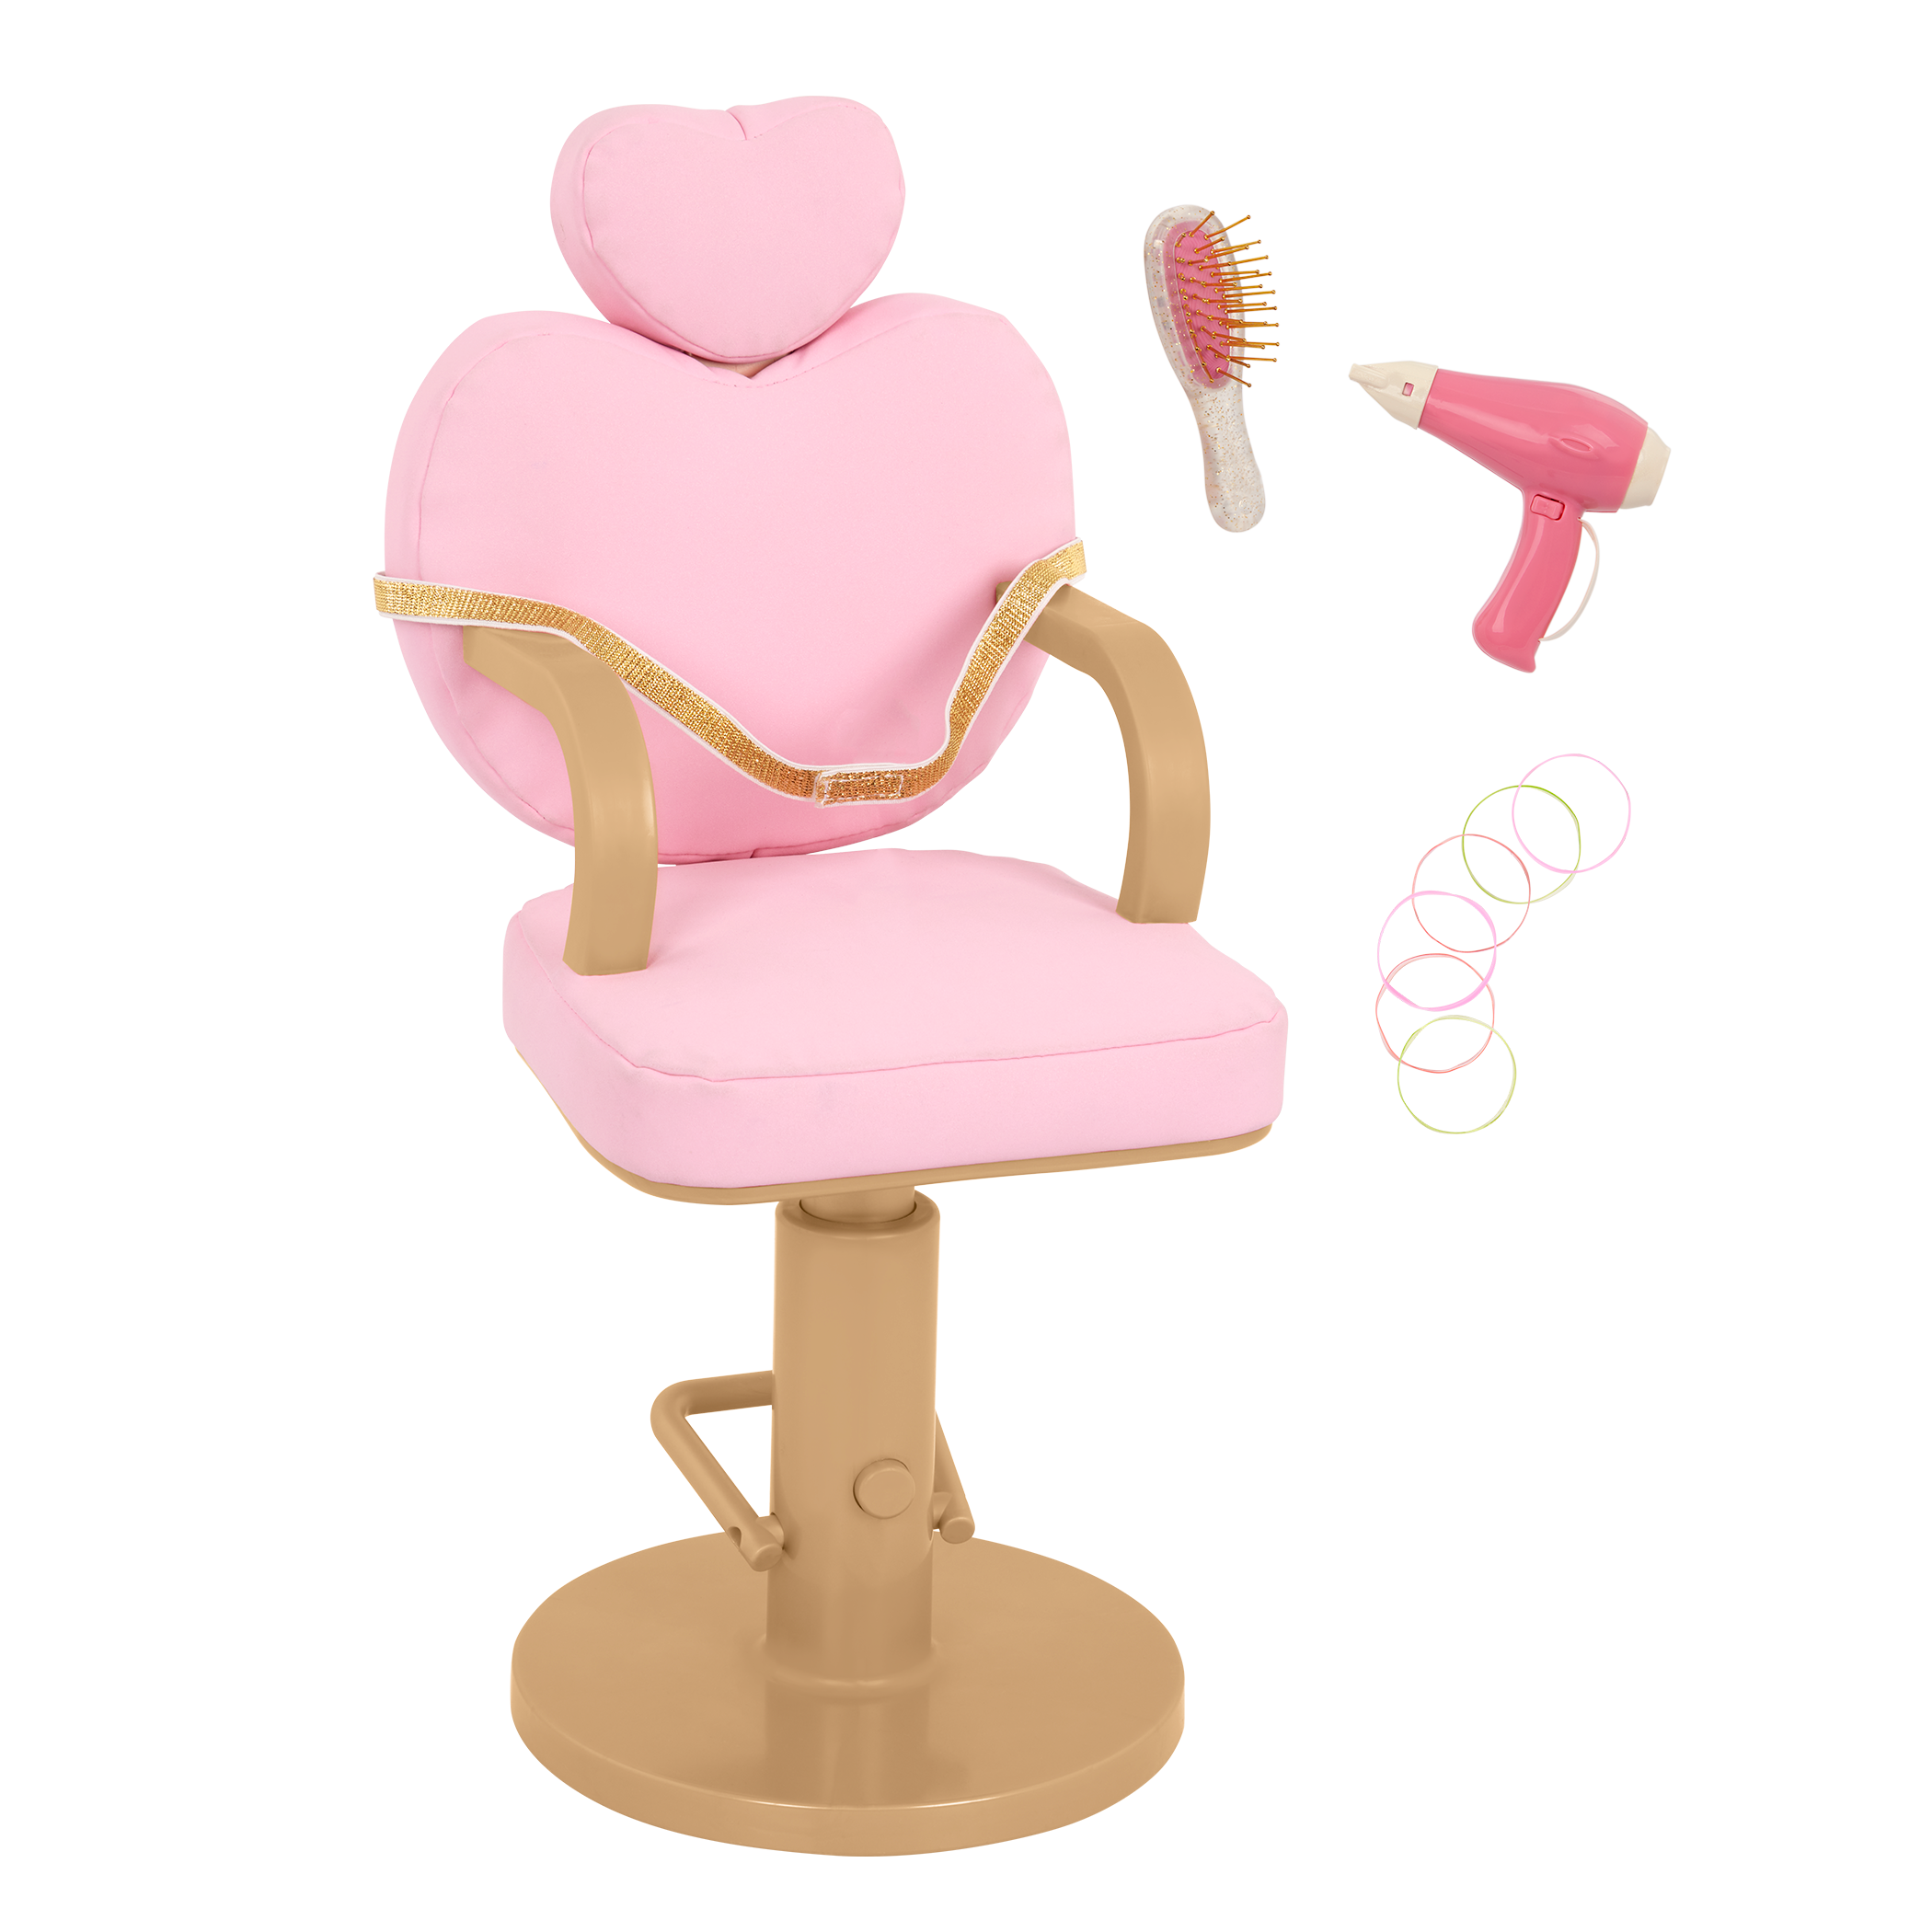 Our Generation Sweet Salon Chair for 18-inch Dolls with accessories 